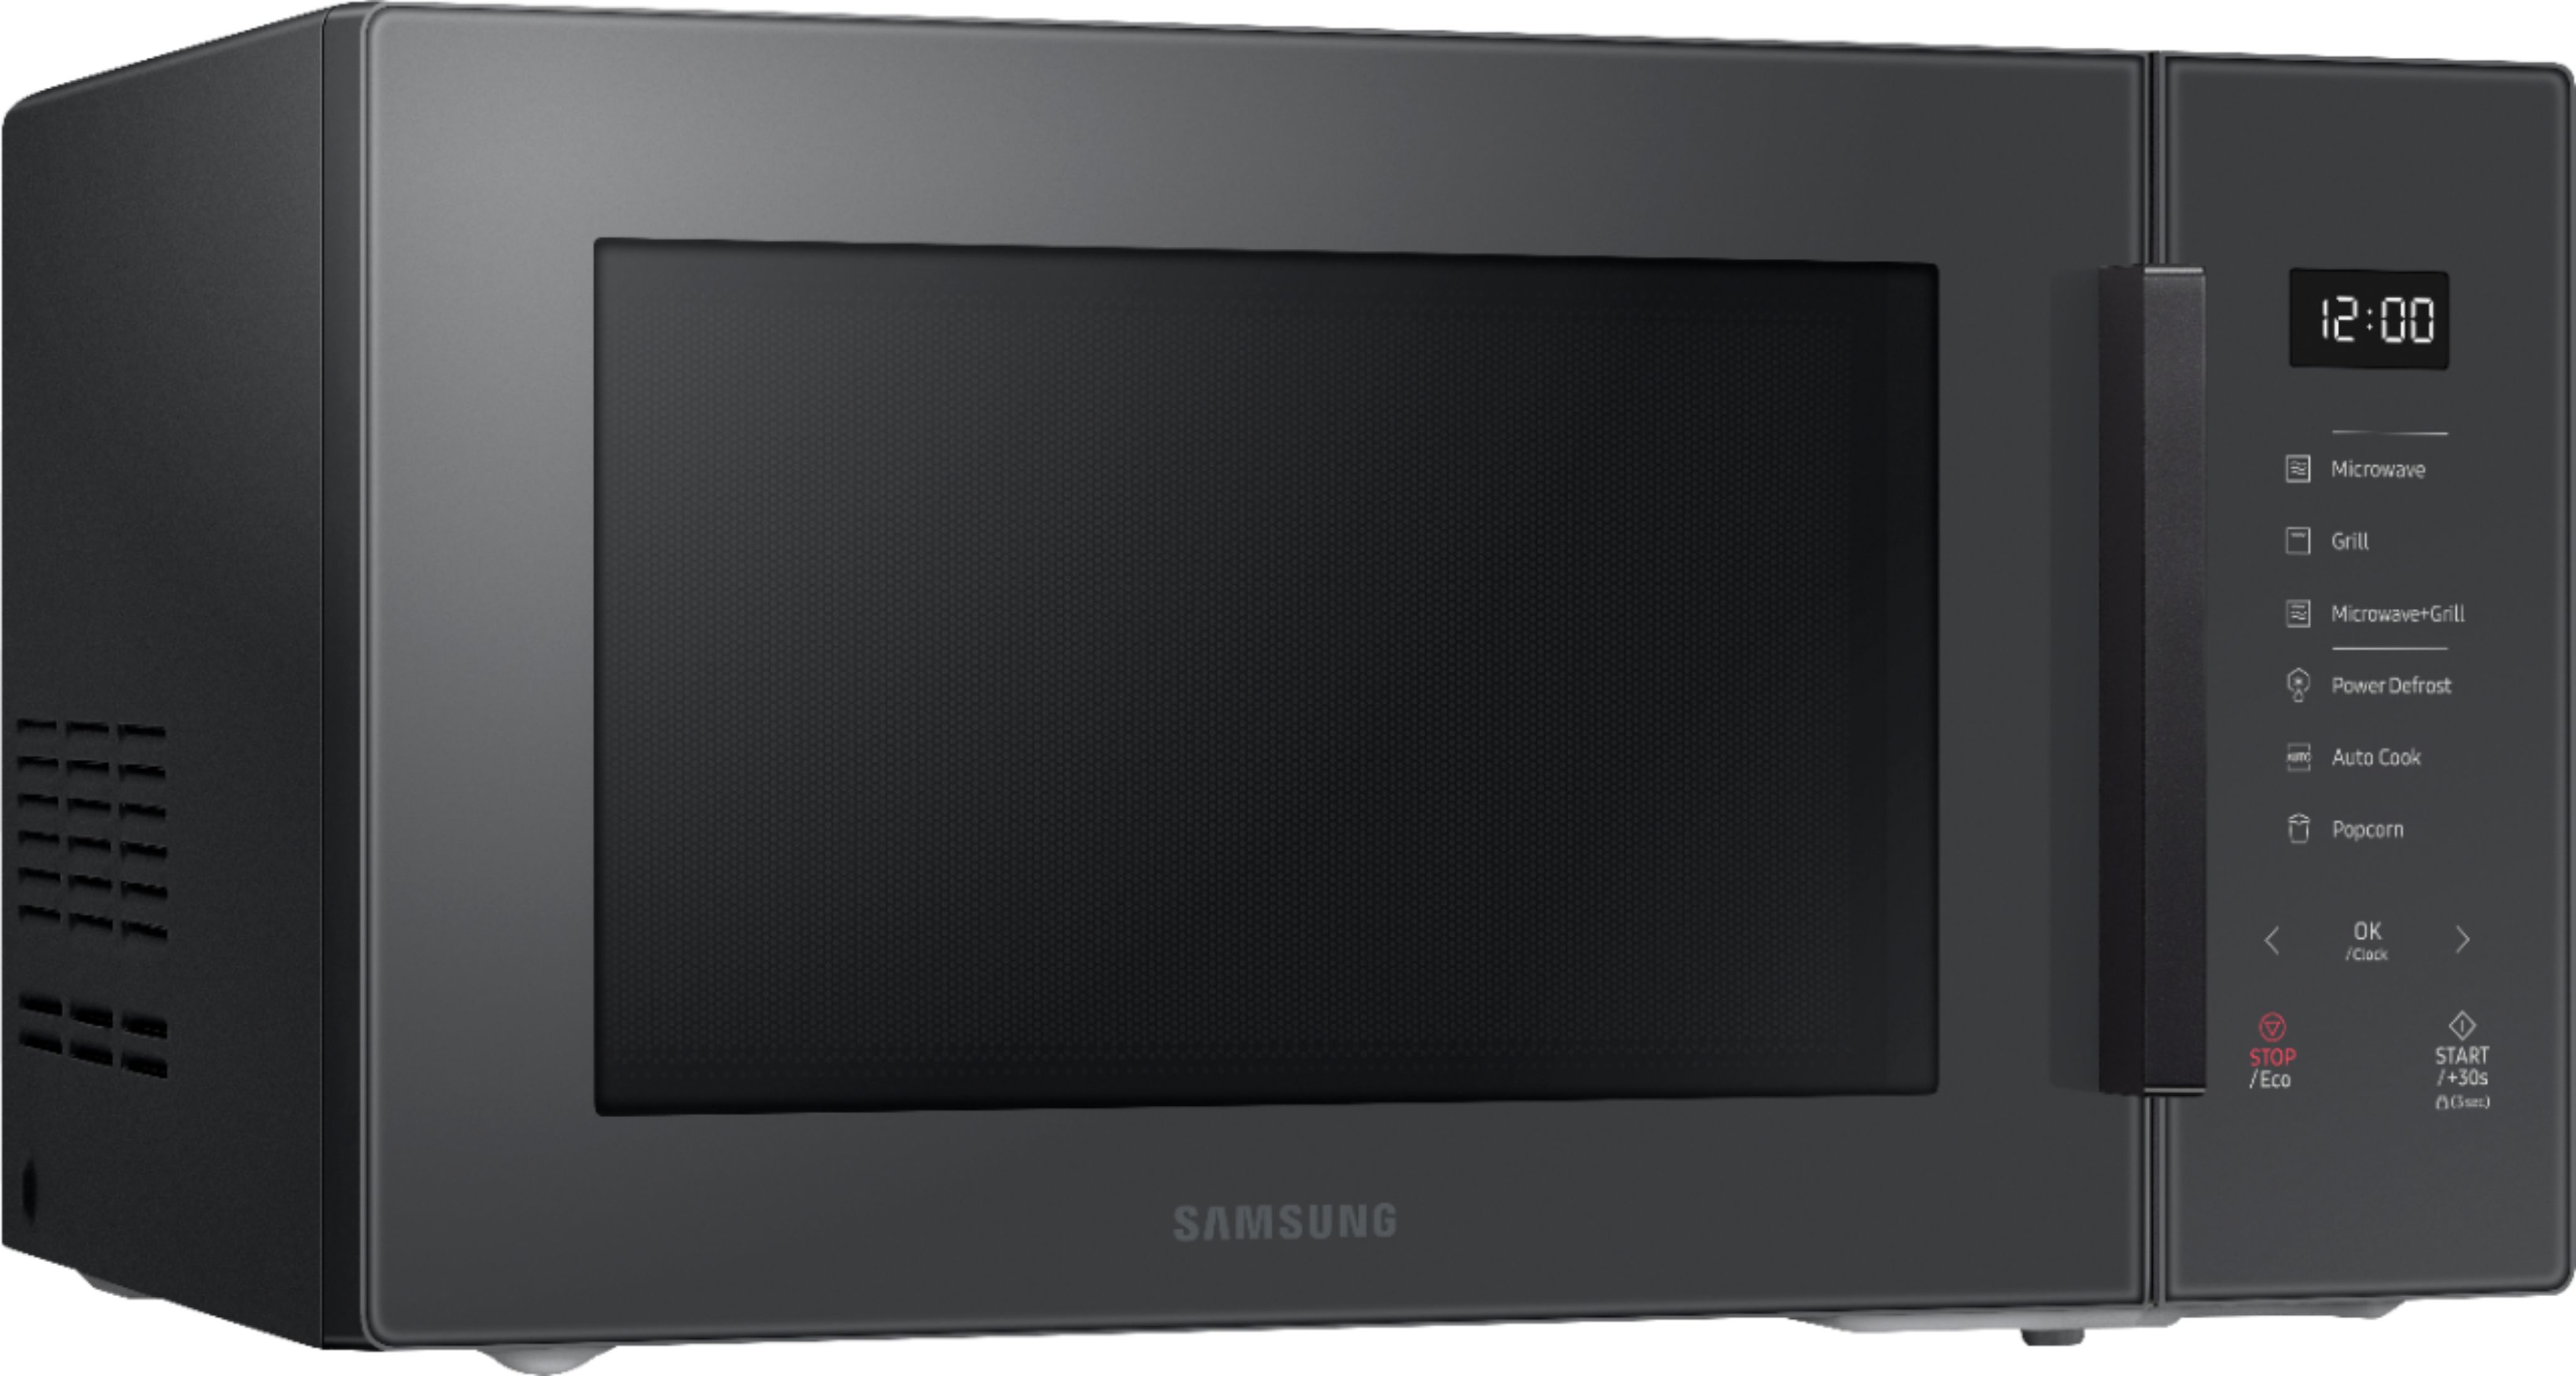 Samsung 1.1 cu. ft Countertop Microwave with Grilling Element in Stainless  Steel MG11H2020CT - The Home Depot